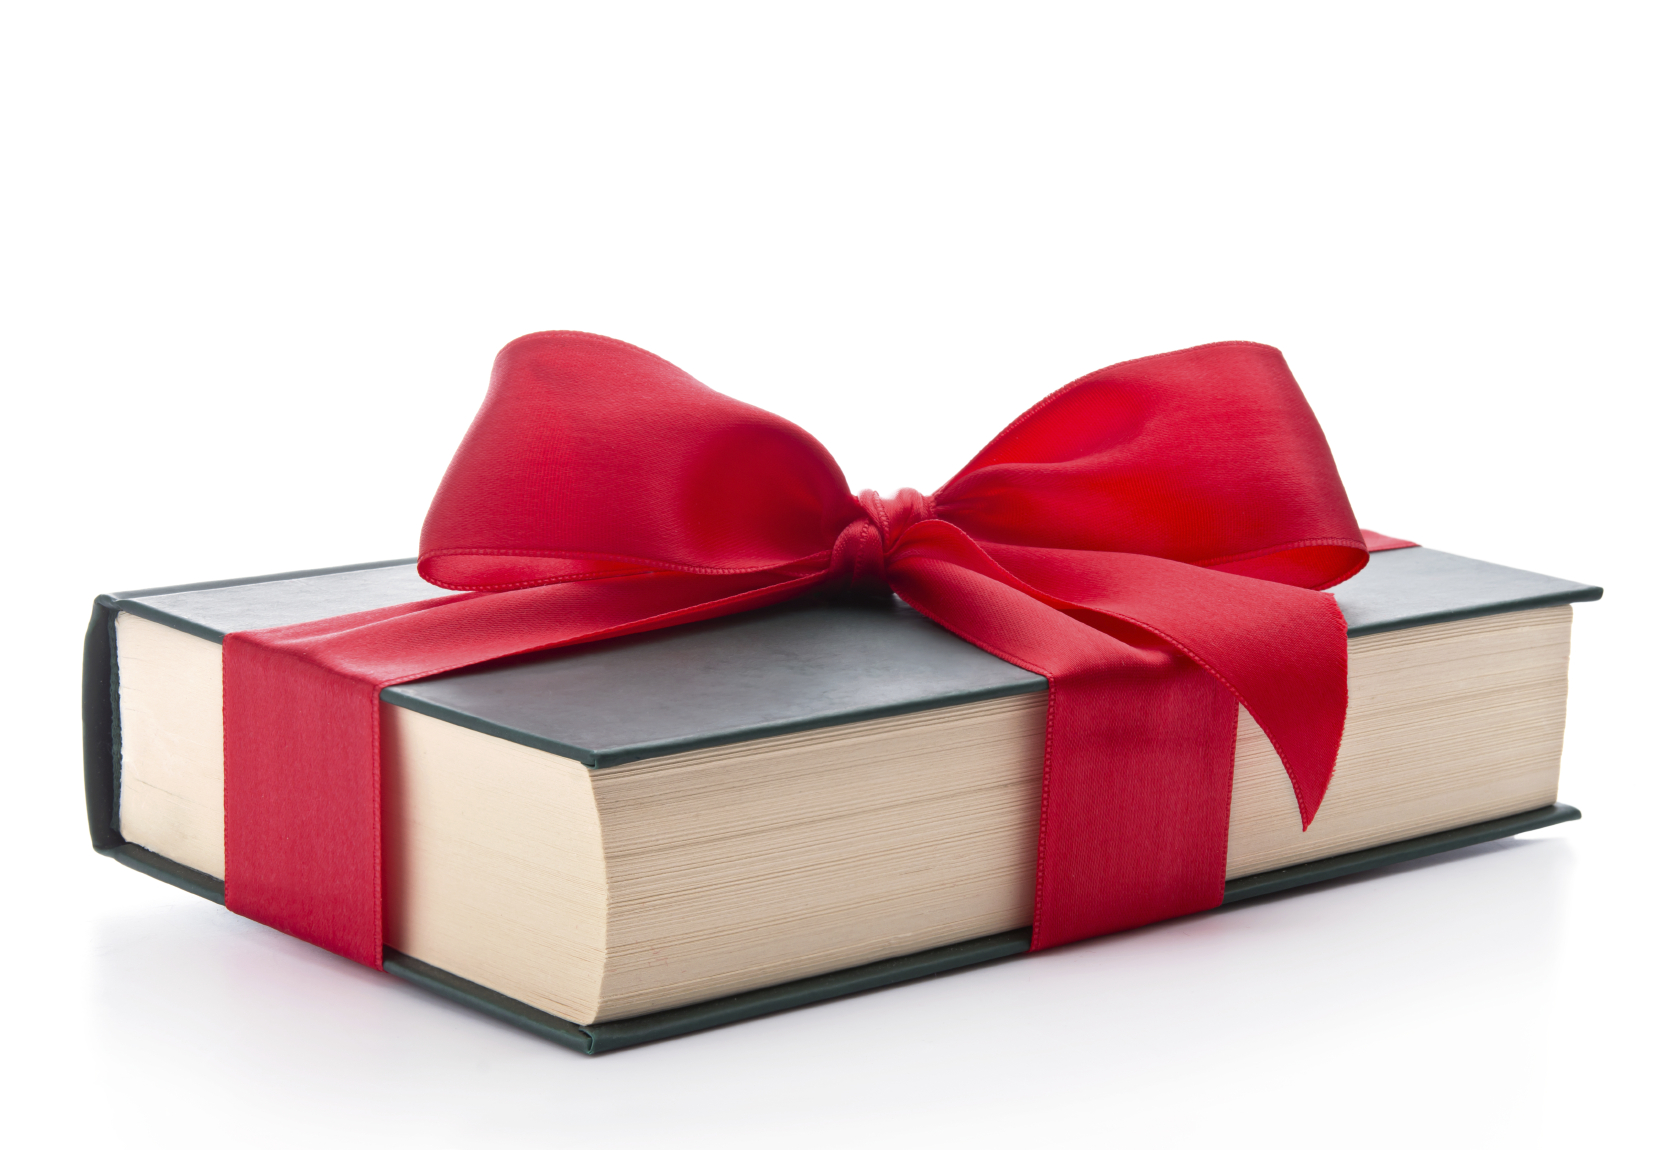 A gift book wrapped in ribbon